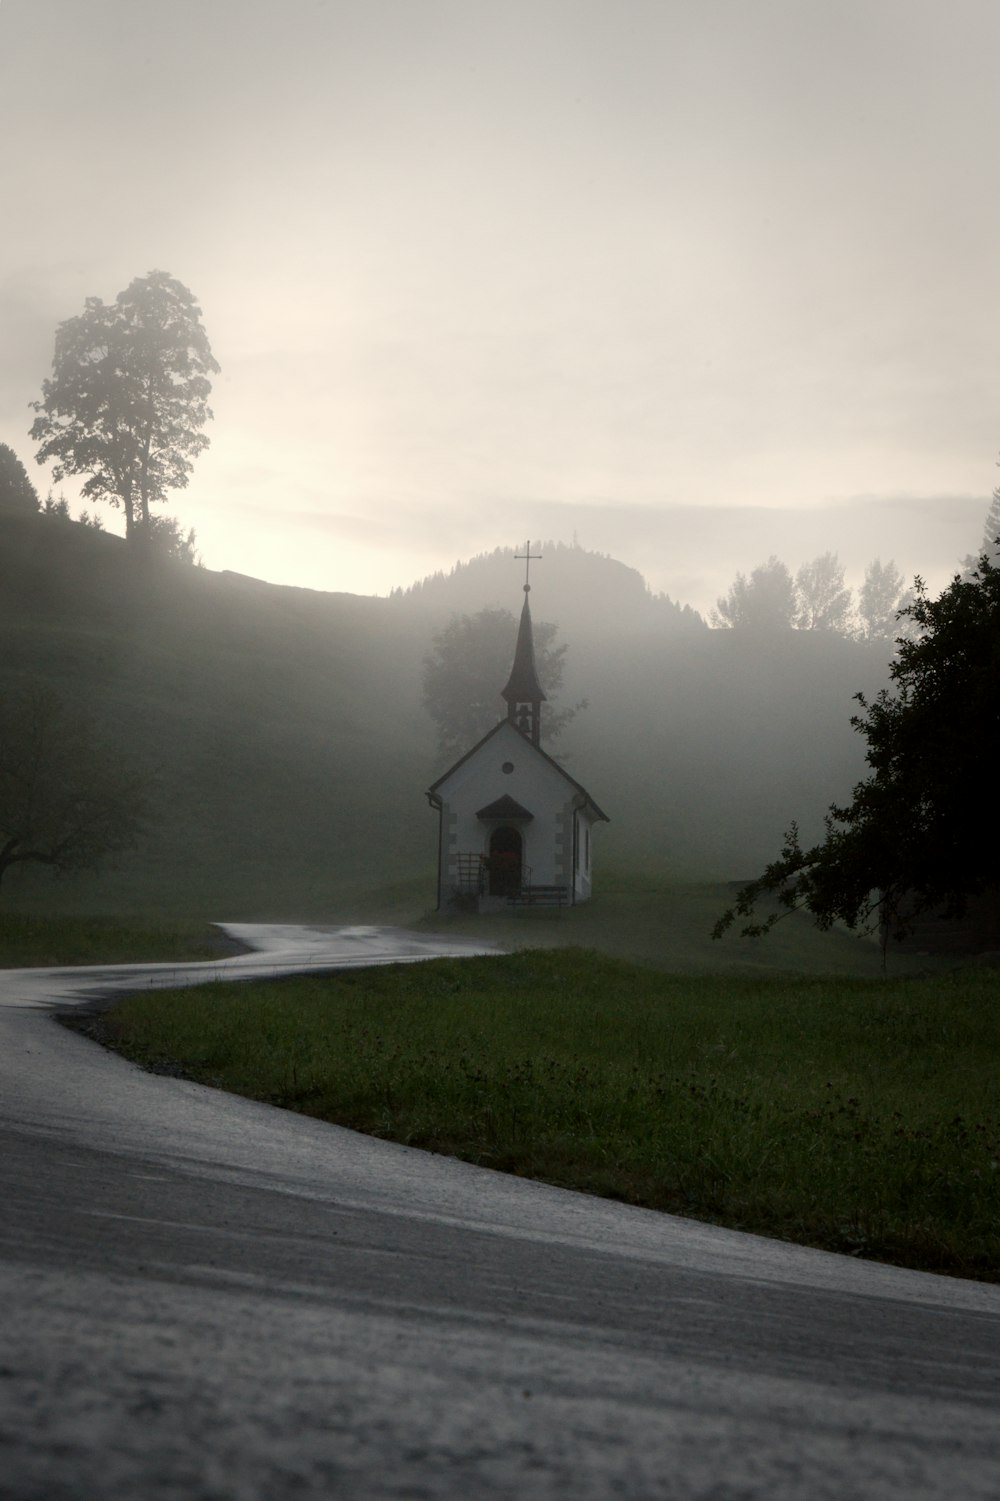 a church in the middle of a rural road